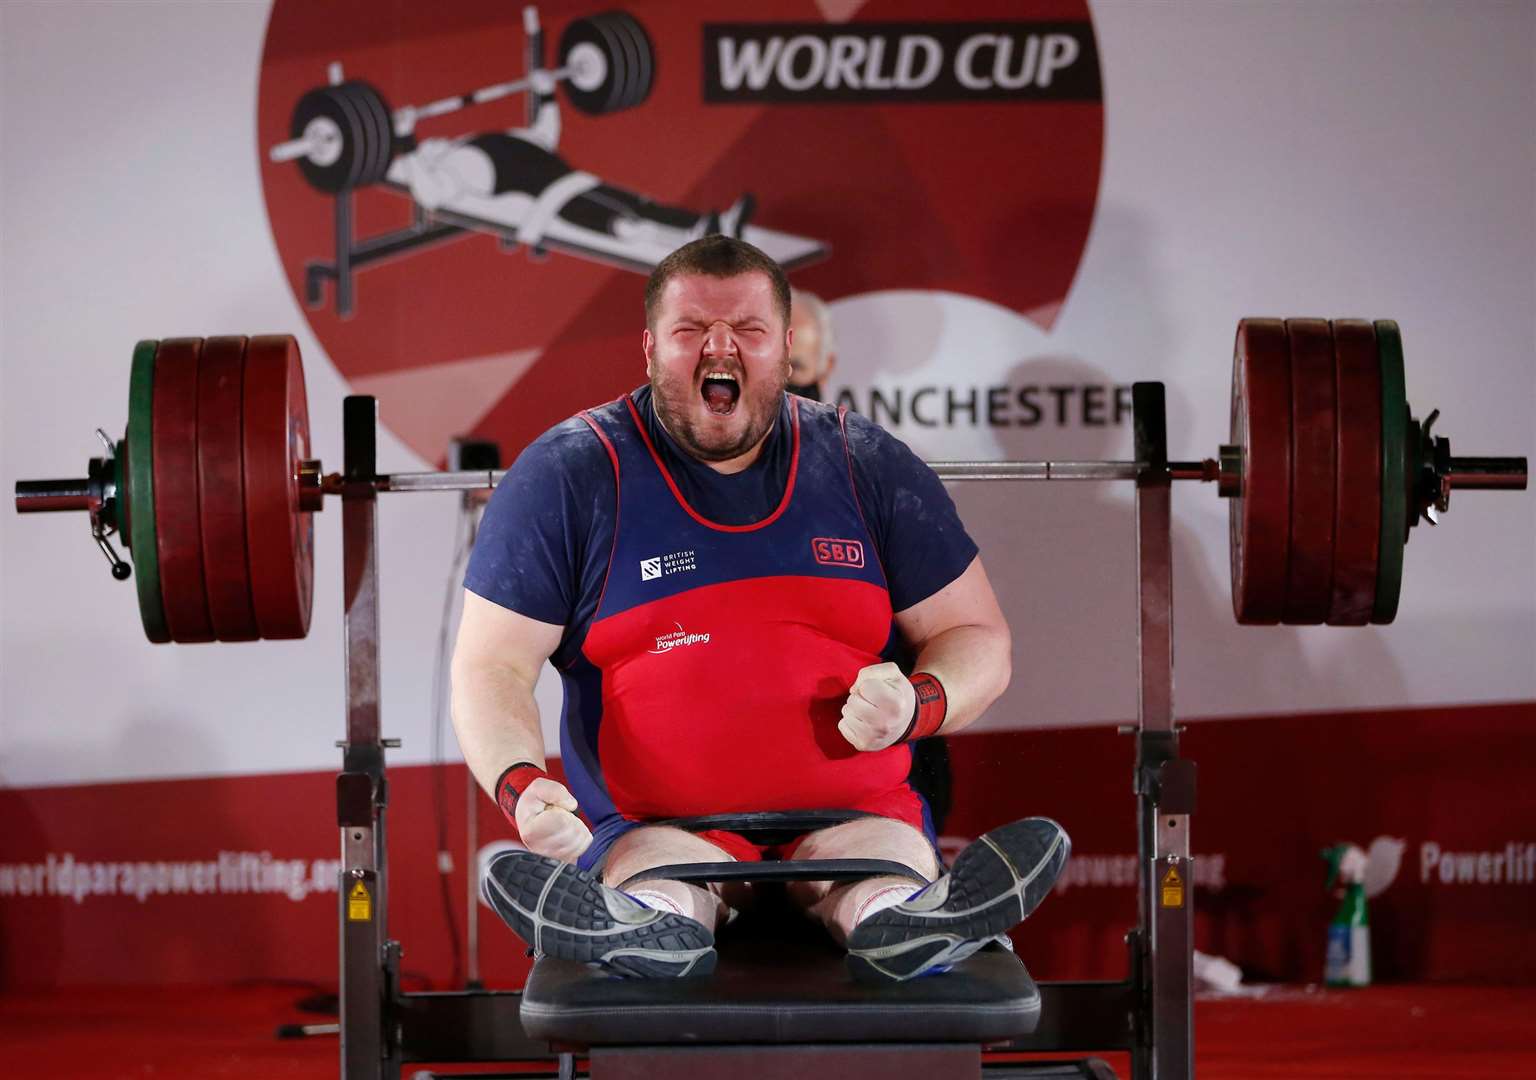 Liam McGarry celebrates at the Para Powerlifting World Cup Picture: Ed Sykes/SWpix.com